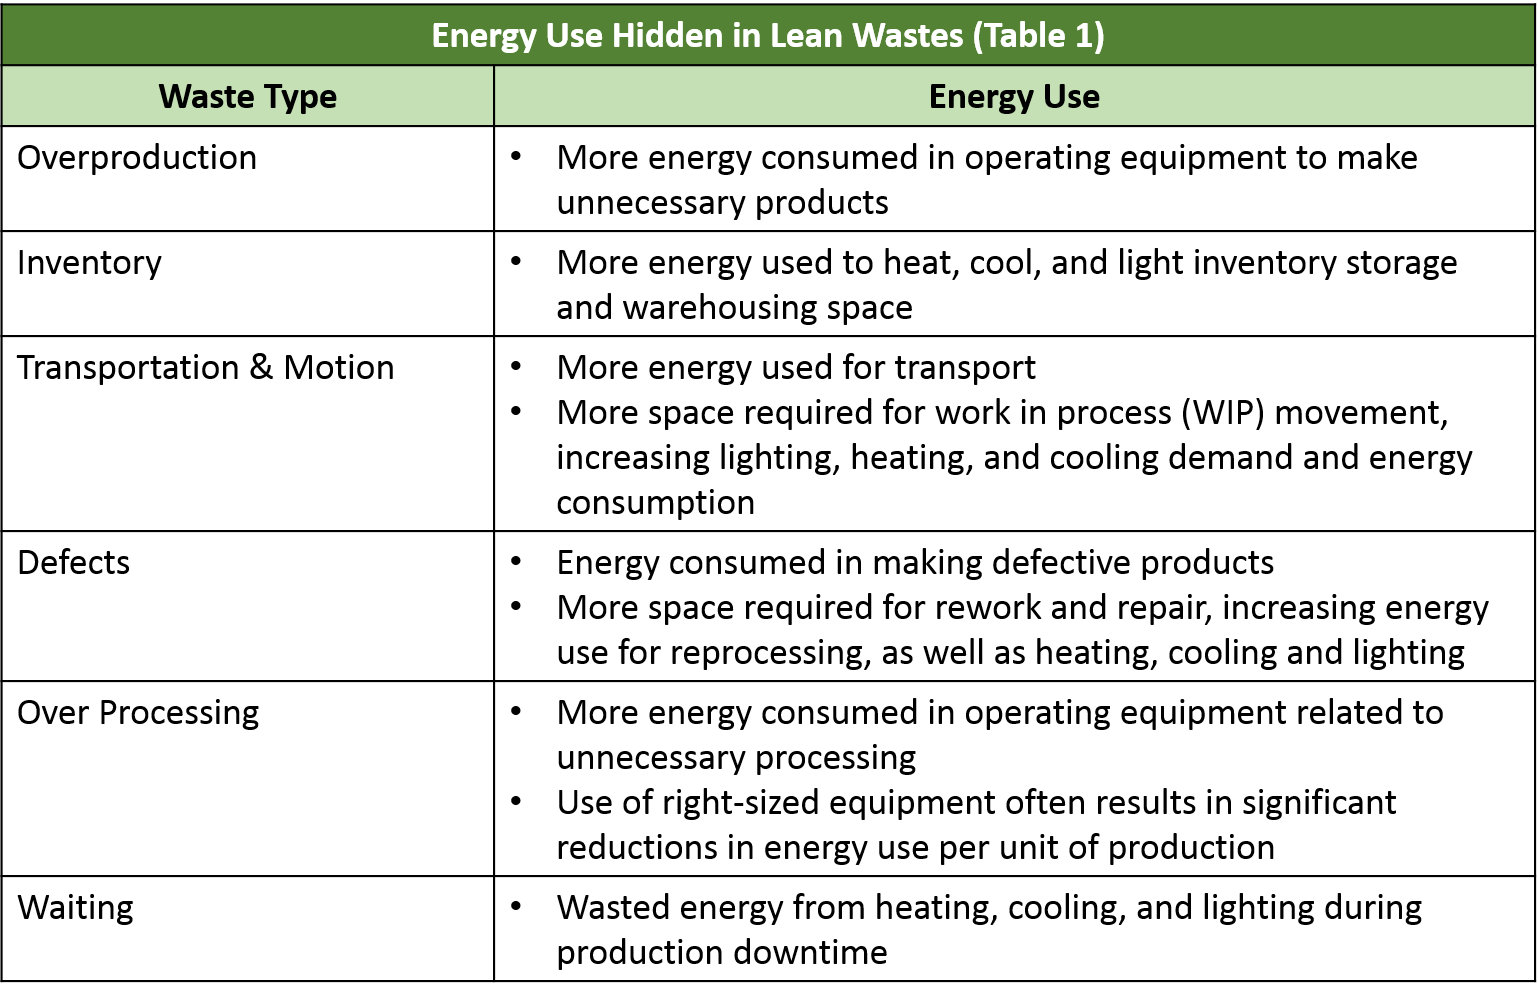 Energy Use Hidden in Lean Wastes (Table 1)